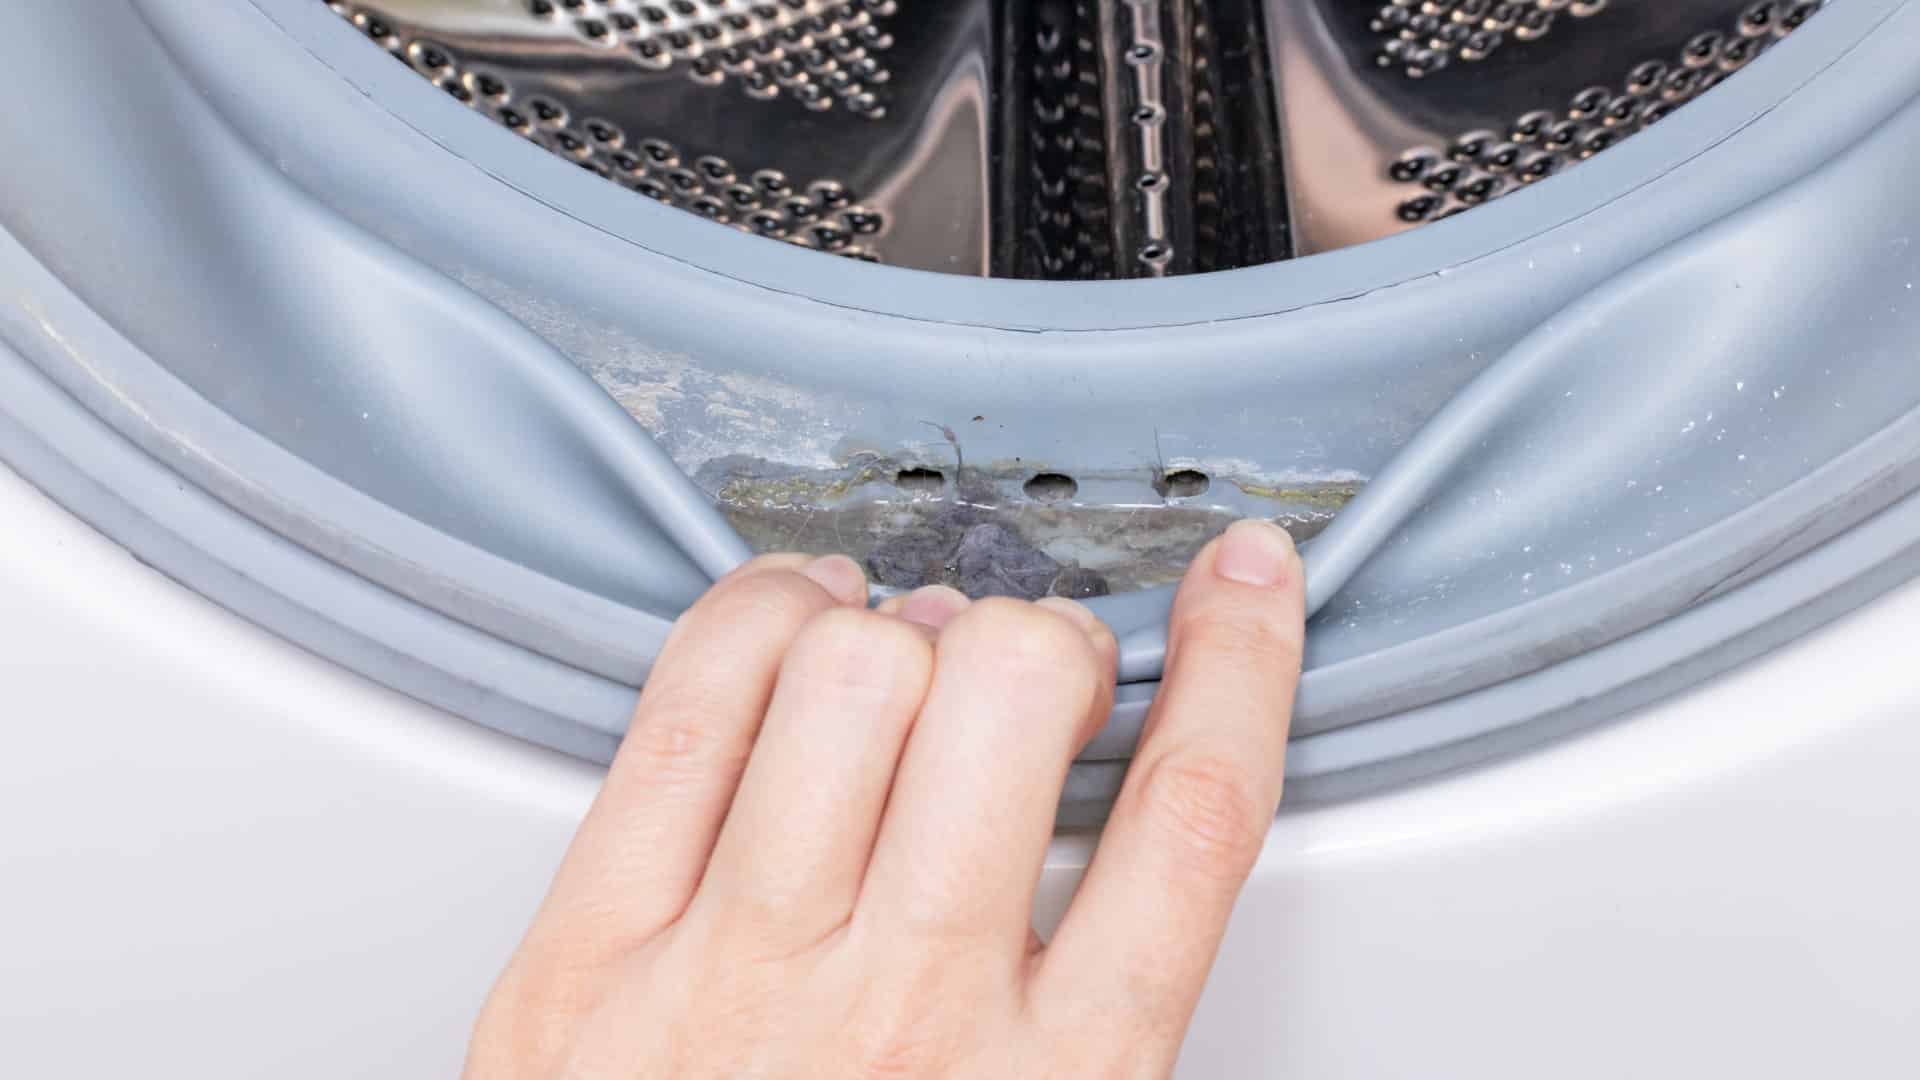 Featured image for “How to Clean Front Load Washer Gasket”